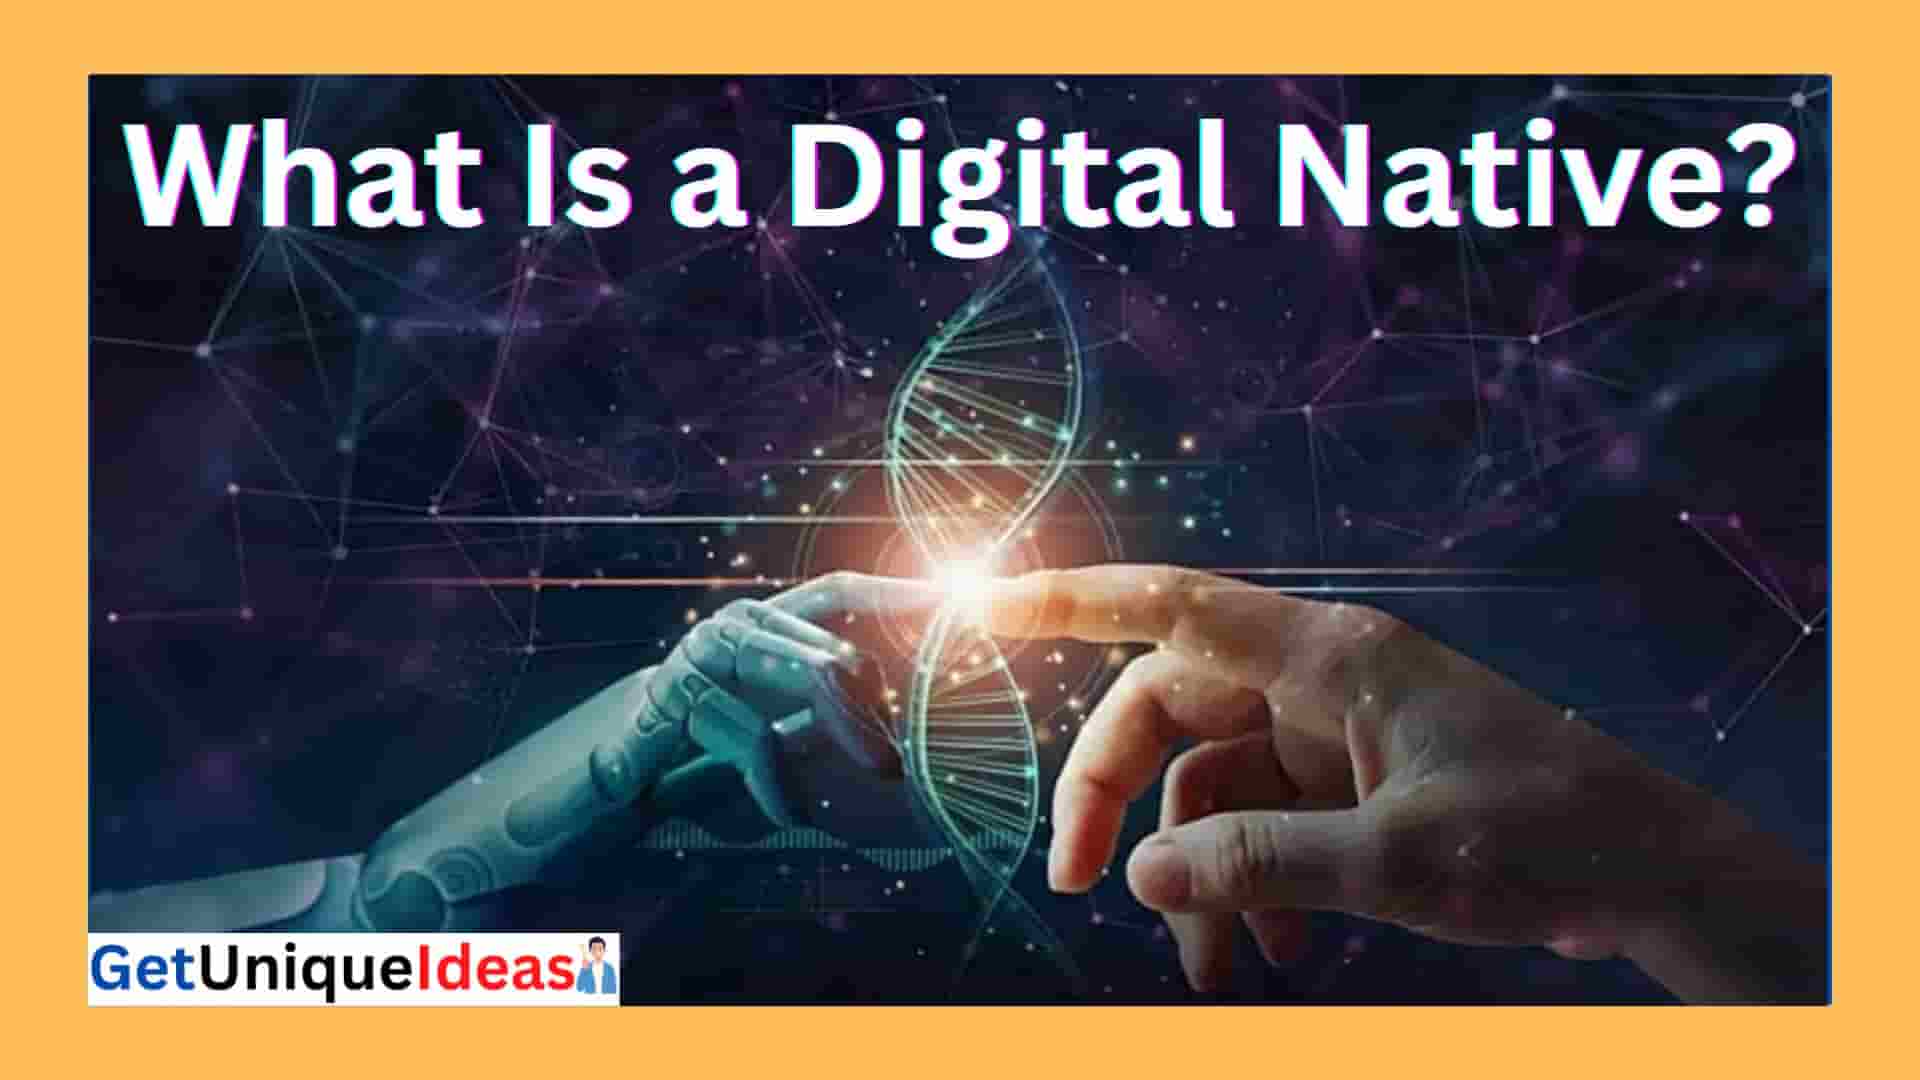 What Is a Digital Native?